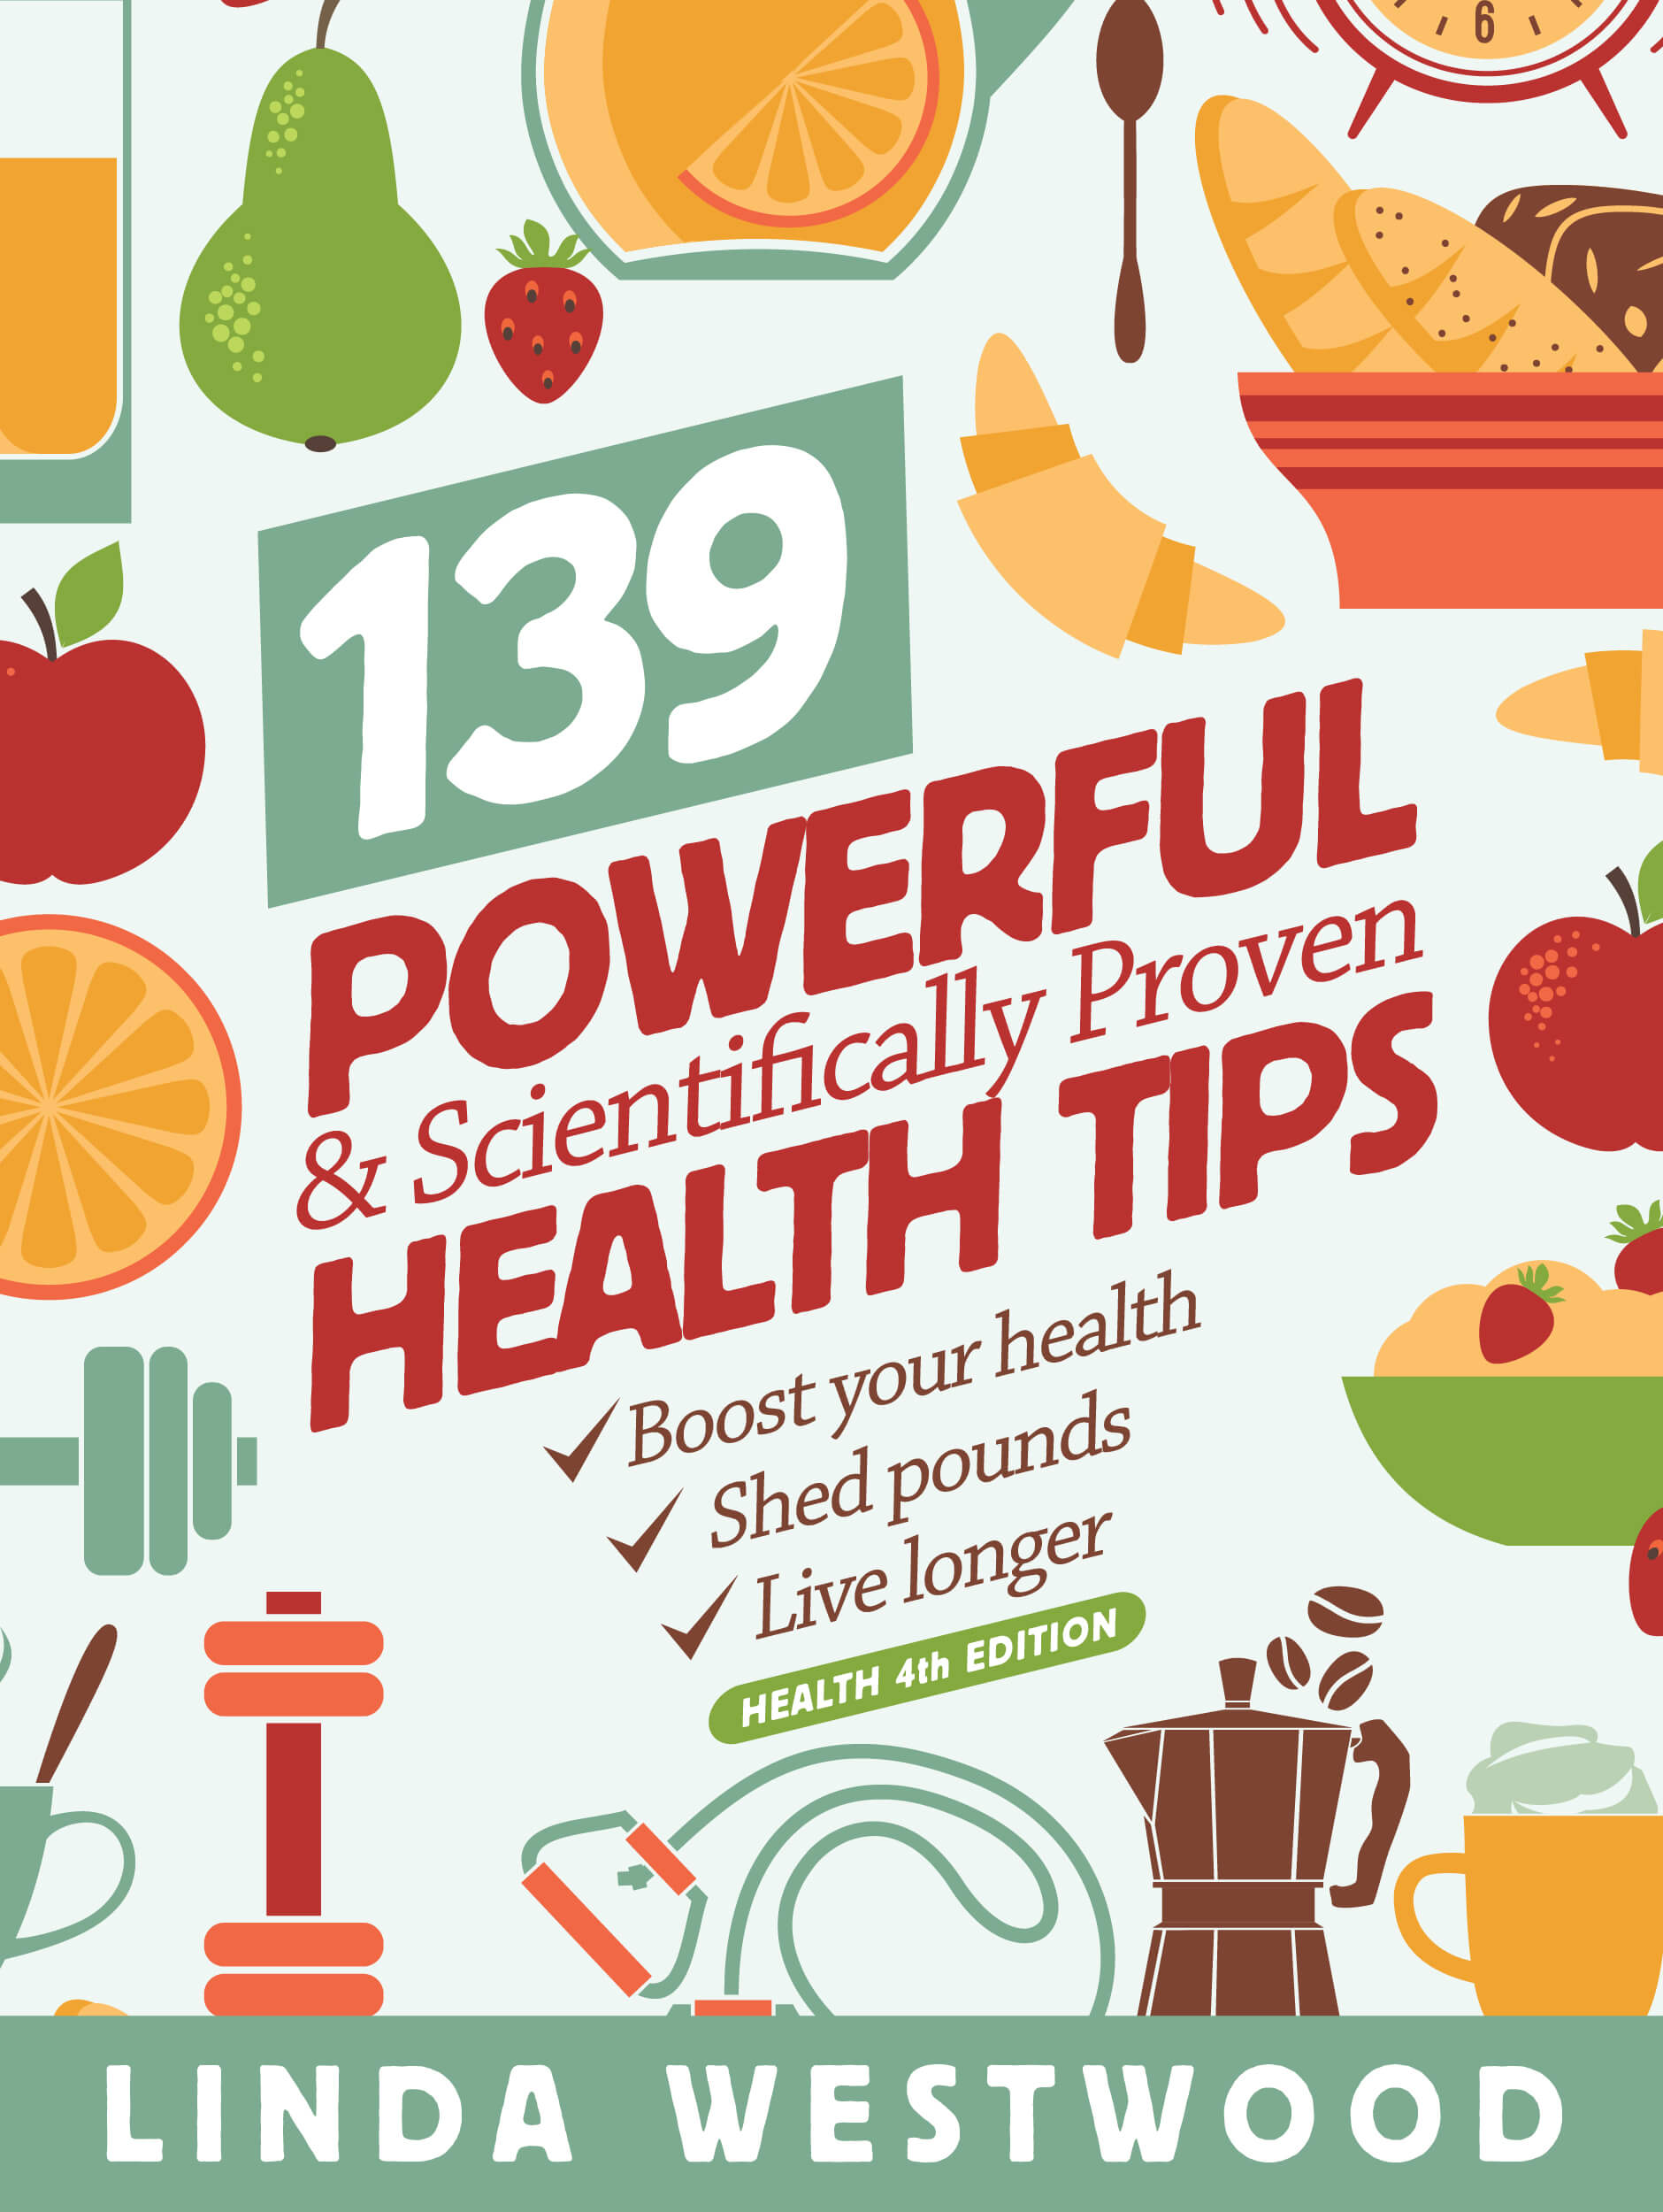 FREE: Health (4th Edition): 139 POWERFUL & Scientifically PROVEN Health Tips to Boost Your Health, Shed Pounds & Live Longer! by Linda Westwood